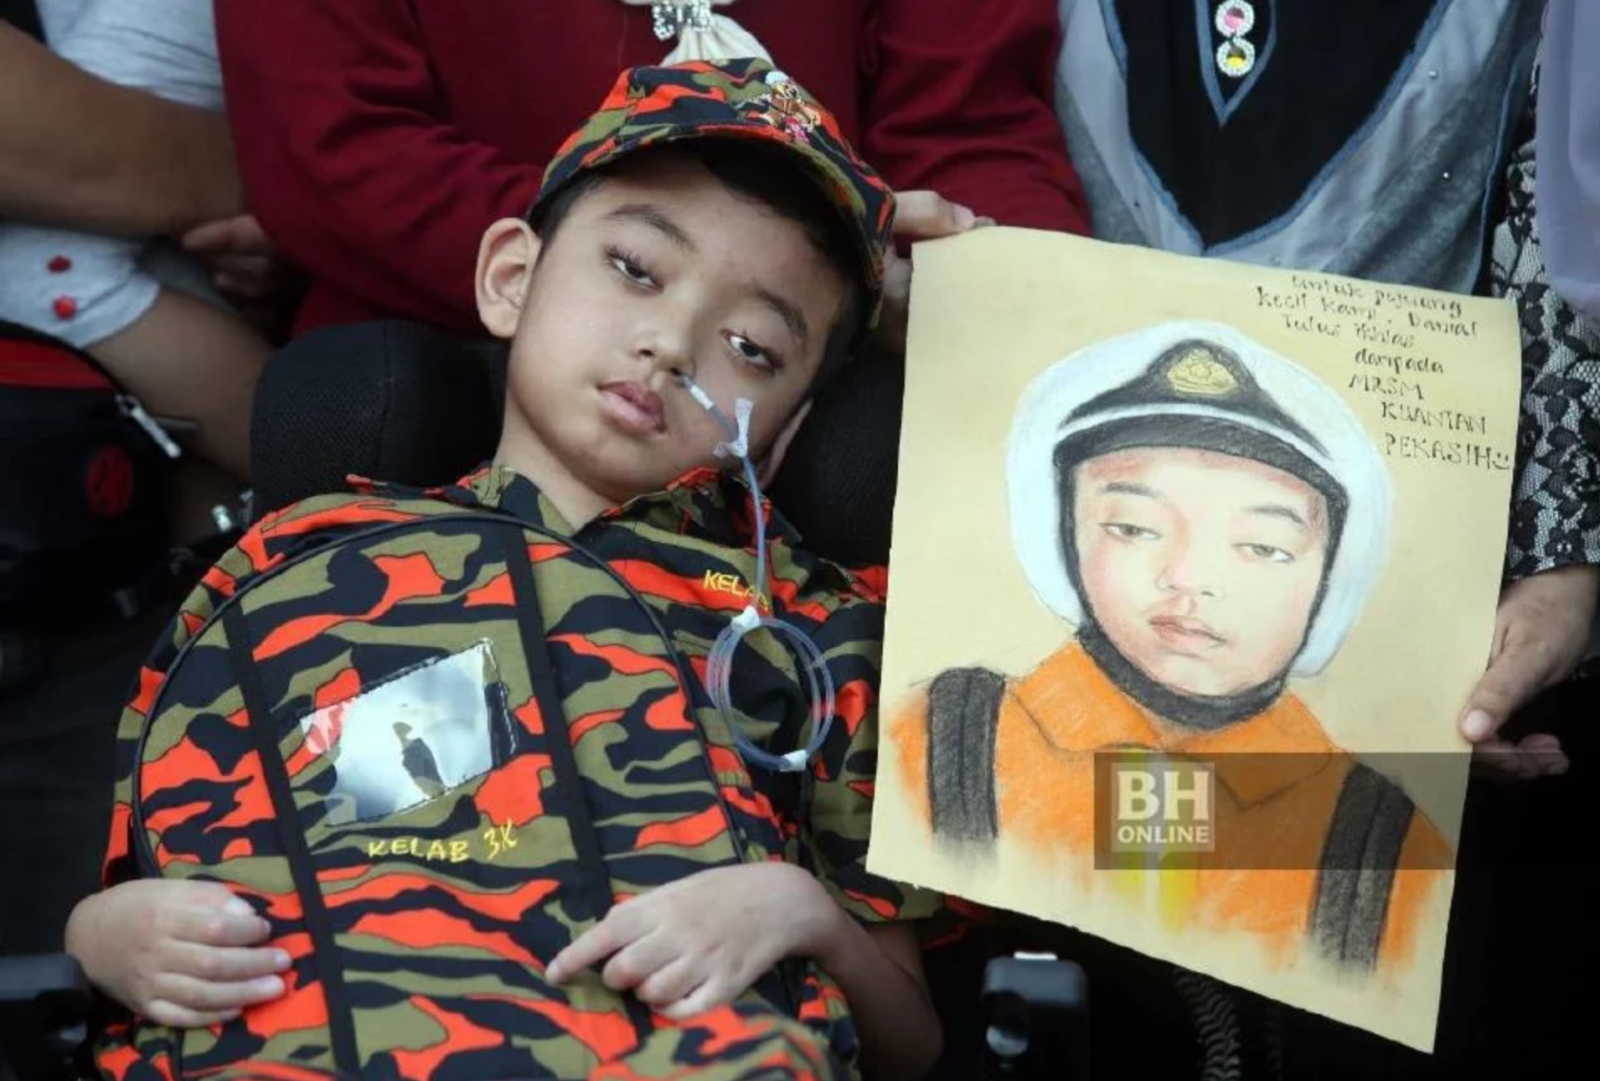 7-Year-Old Boy Diagnosed with Terminal Brain Cancer - WORLD OF BUZZ